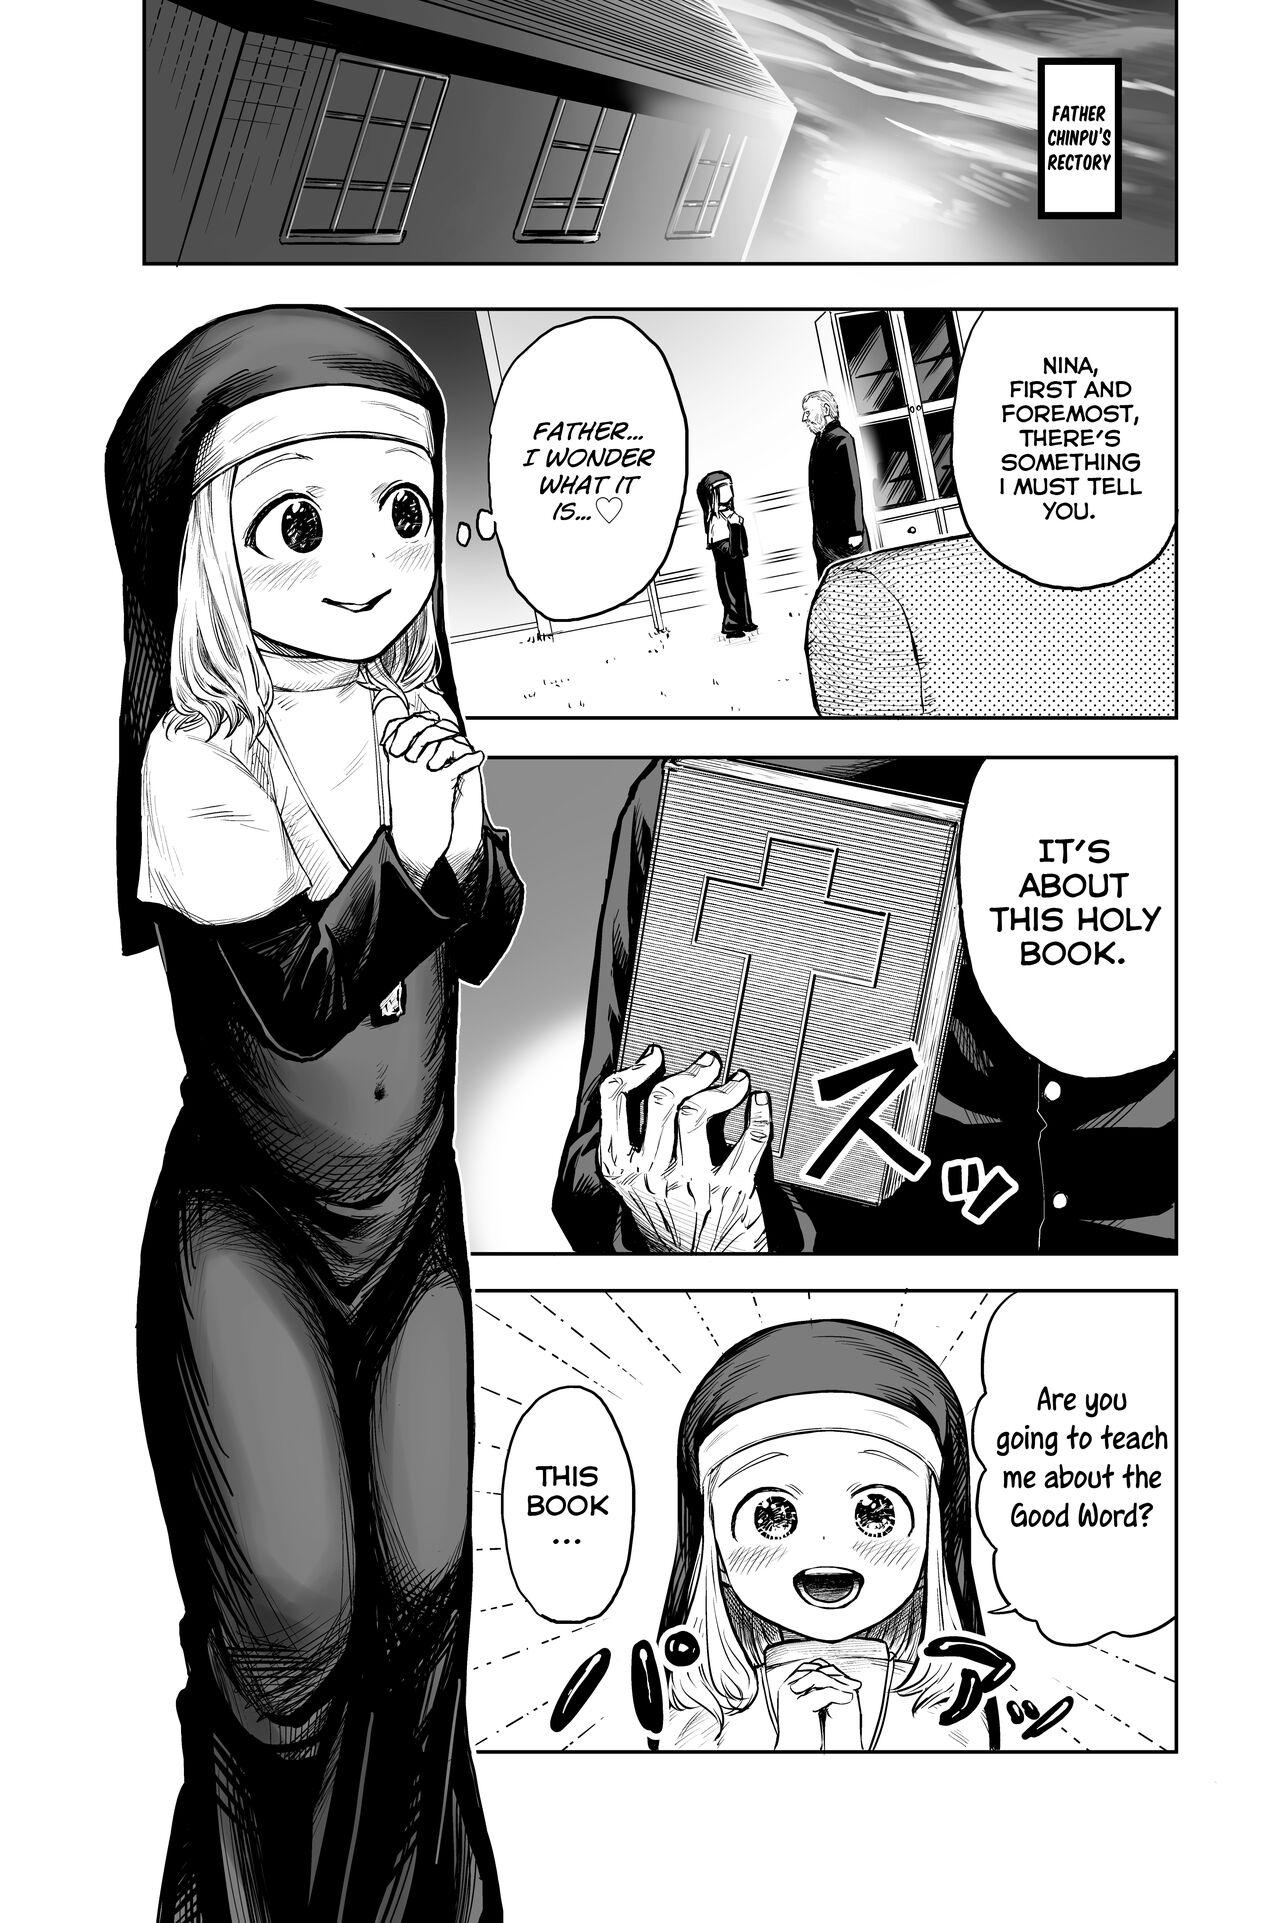 Stroking Loli Sister to Sex suru Isshuukan | A Week of Sex With a Loli Nun Reversecowgirl - Page 8